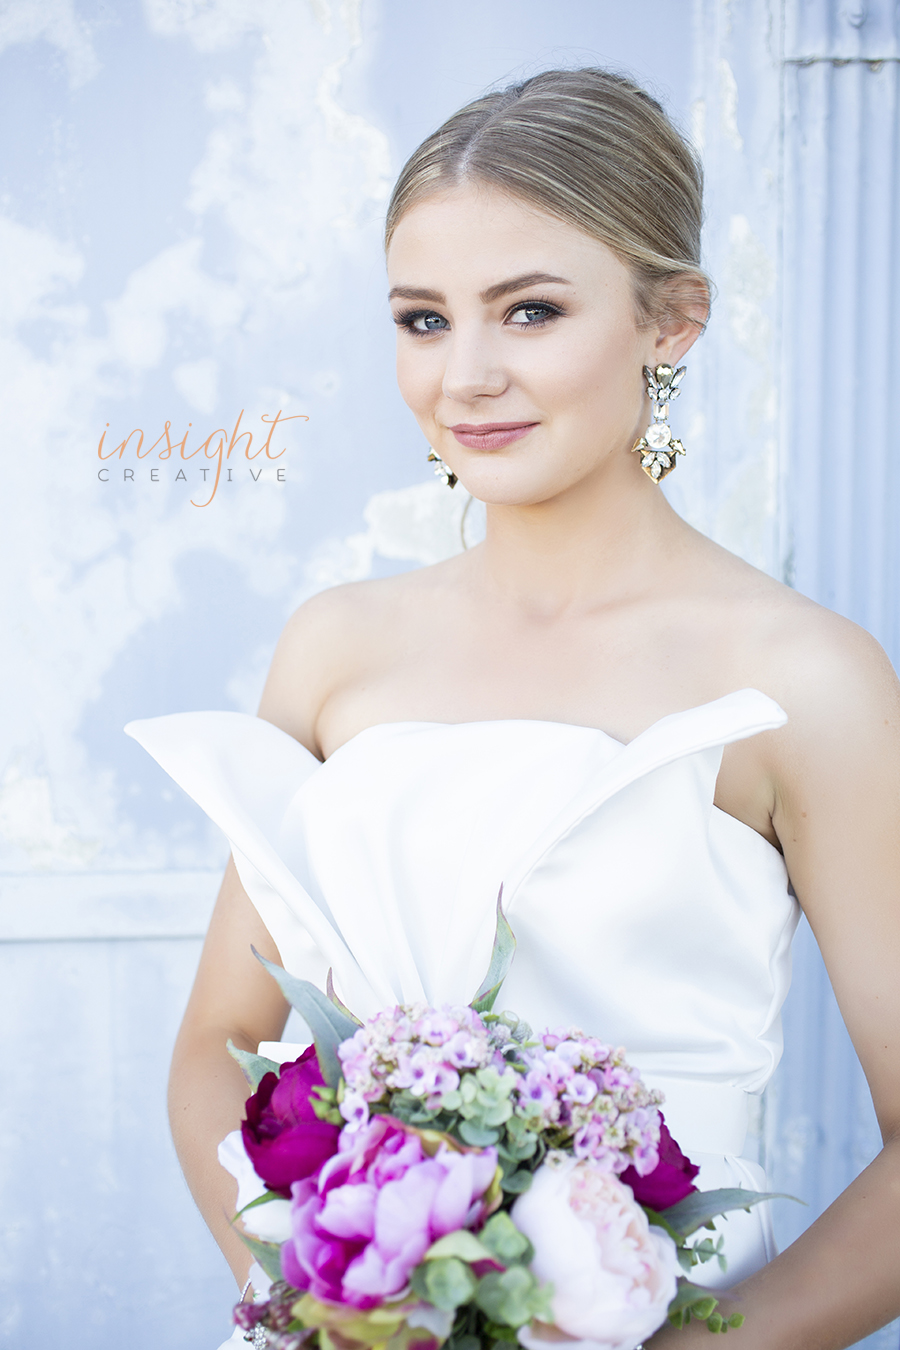 natural formal photography shot by Townsville photographer Megan Marano from Insight Creative photography studio.